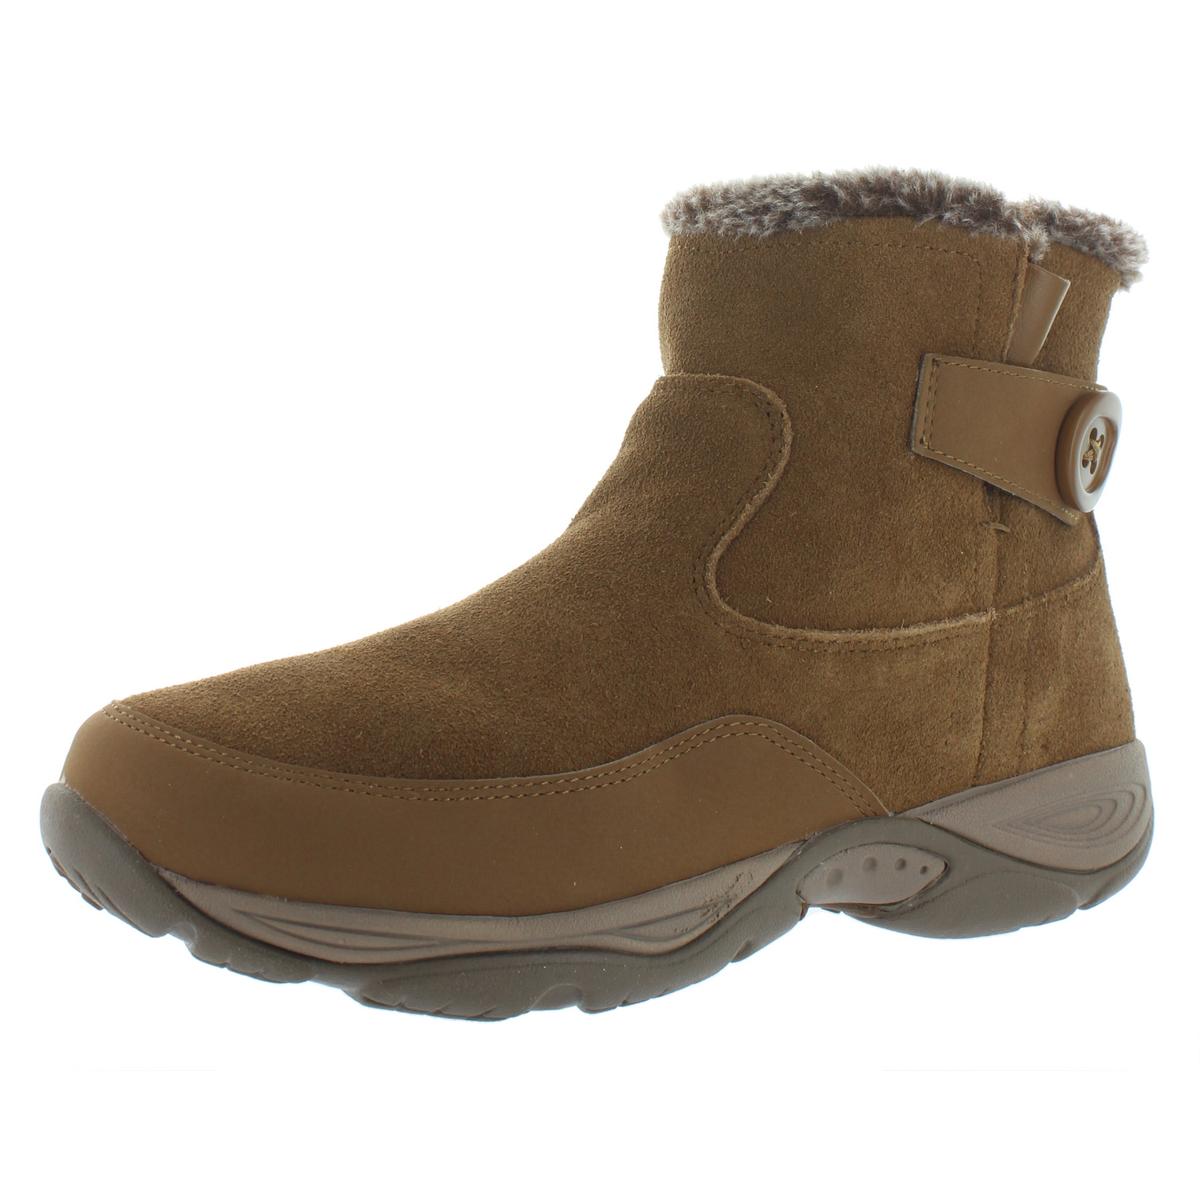 Easy Spirit Womens Excel 8 Brown Ankle Boots Shoes 6 Medium (B,M) BHFO ...